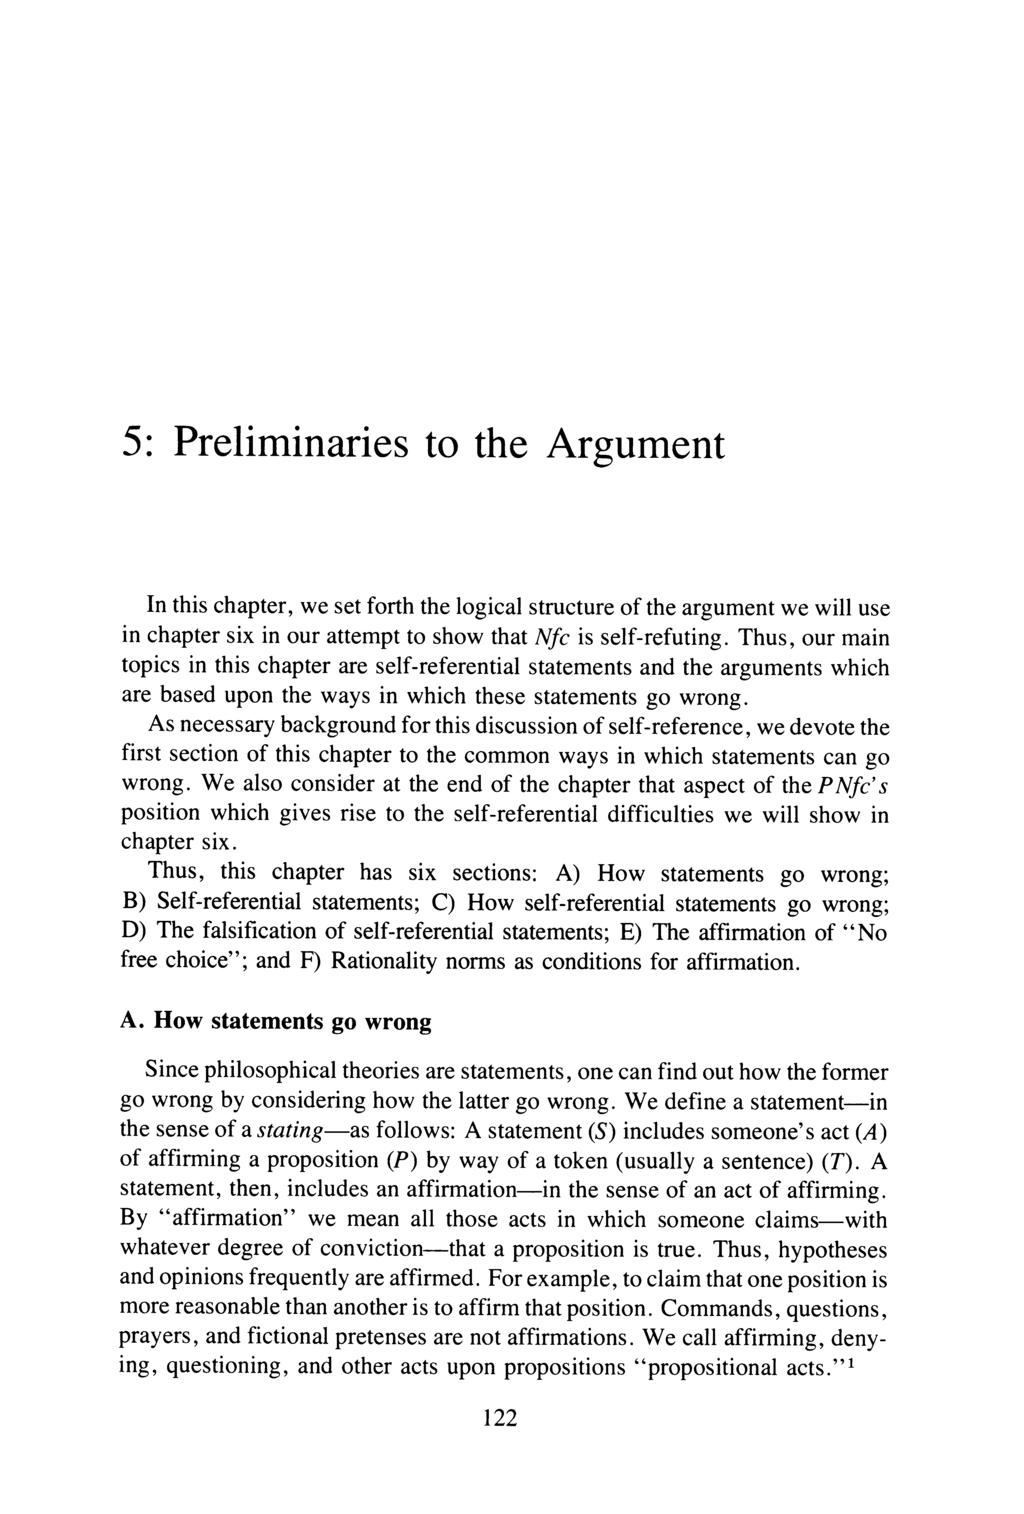 5: Preliminaries to the Argument In this chapter, we set forth the logical structure of the argument we will use in chapter six in our attempt to show that Nfc is self-refuting.